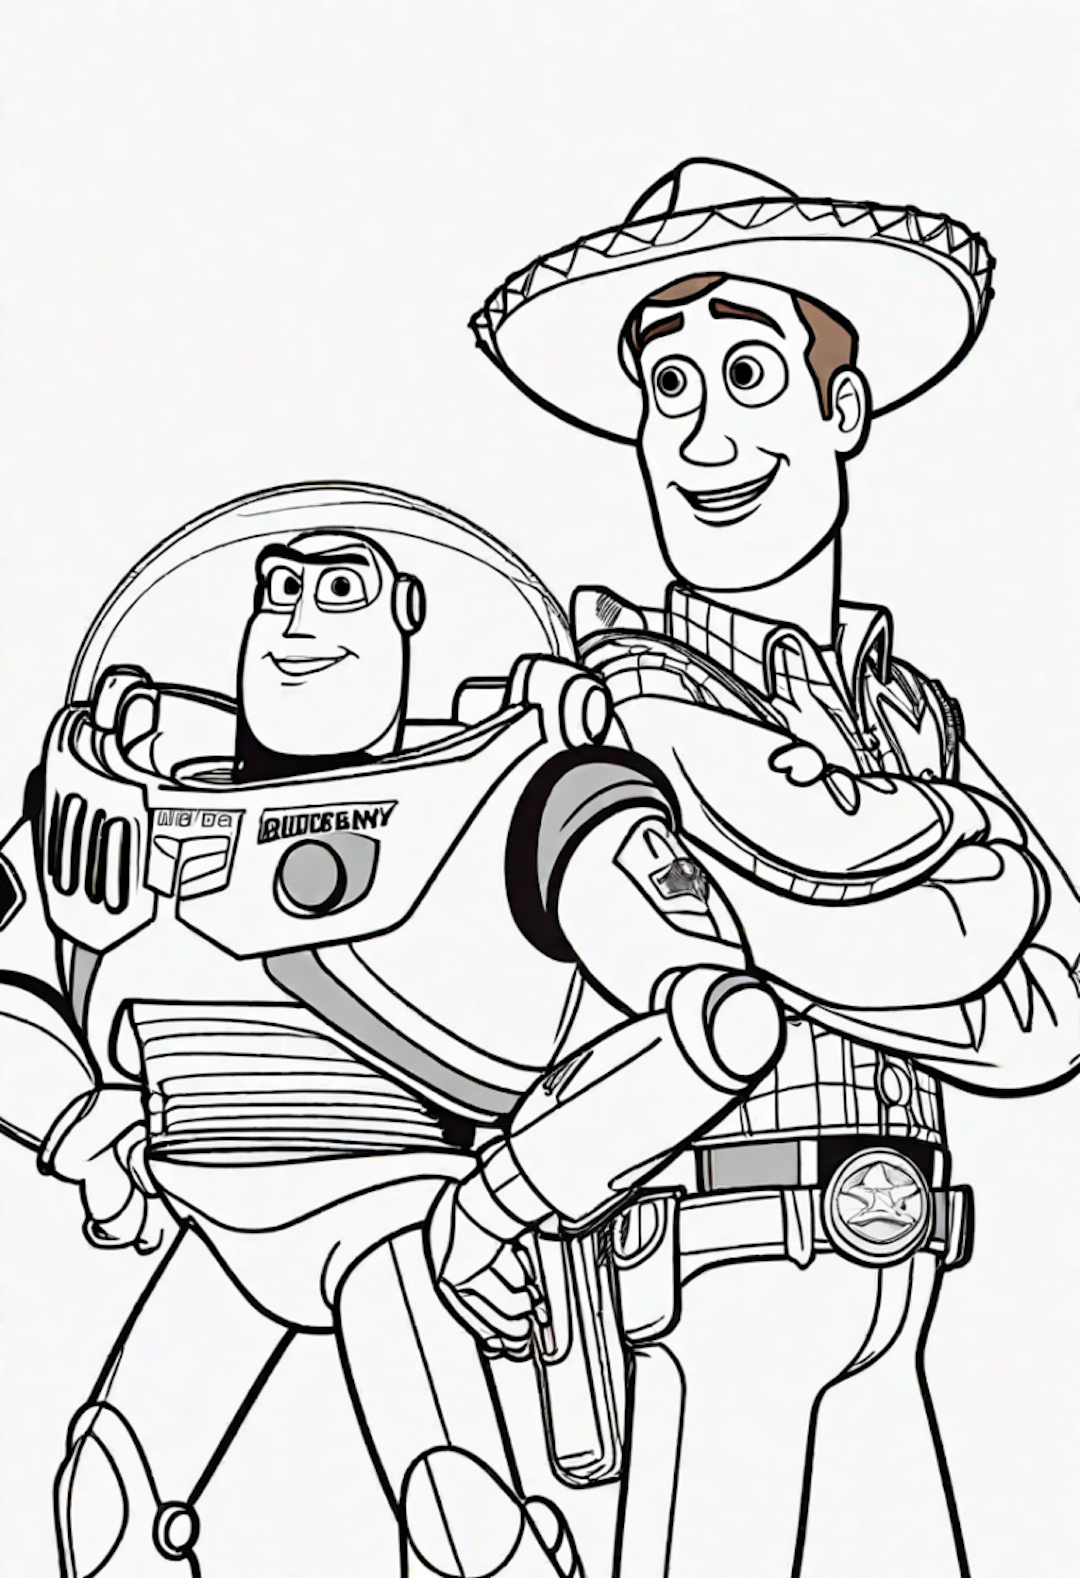 Buzz Lightyear Talking To Woody coloring pages